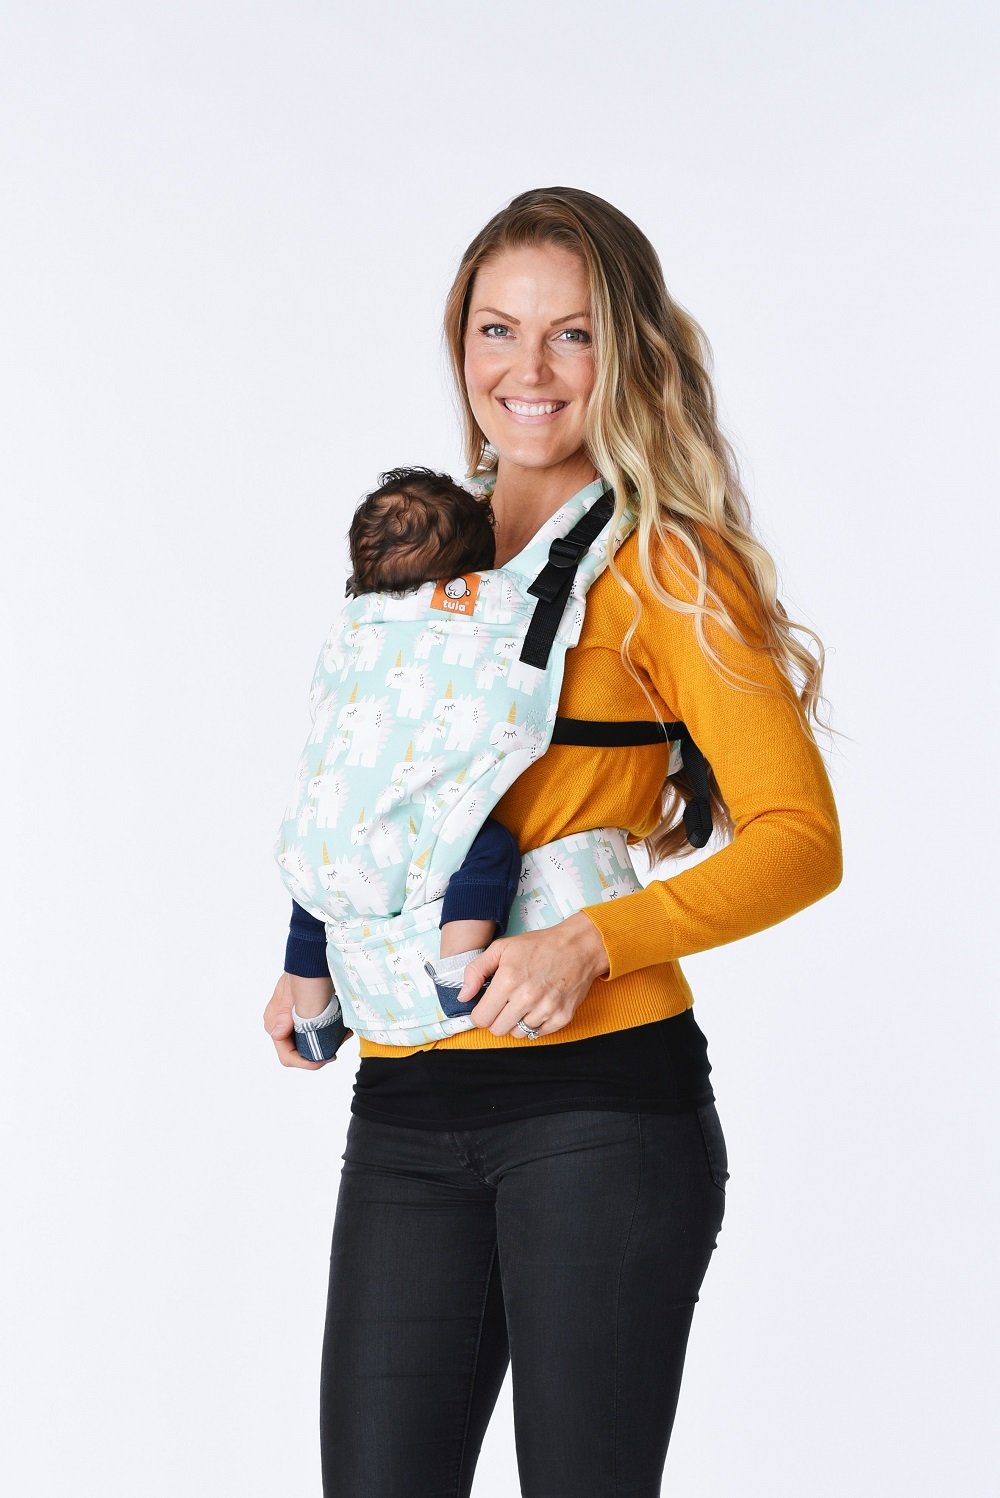 A baby and their mother using the ergonomic Tula Free-to-Grow Baby Carrier Unisaurus in front-carry position.